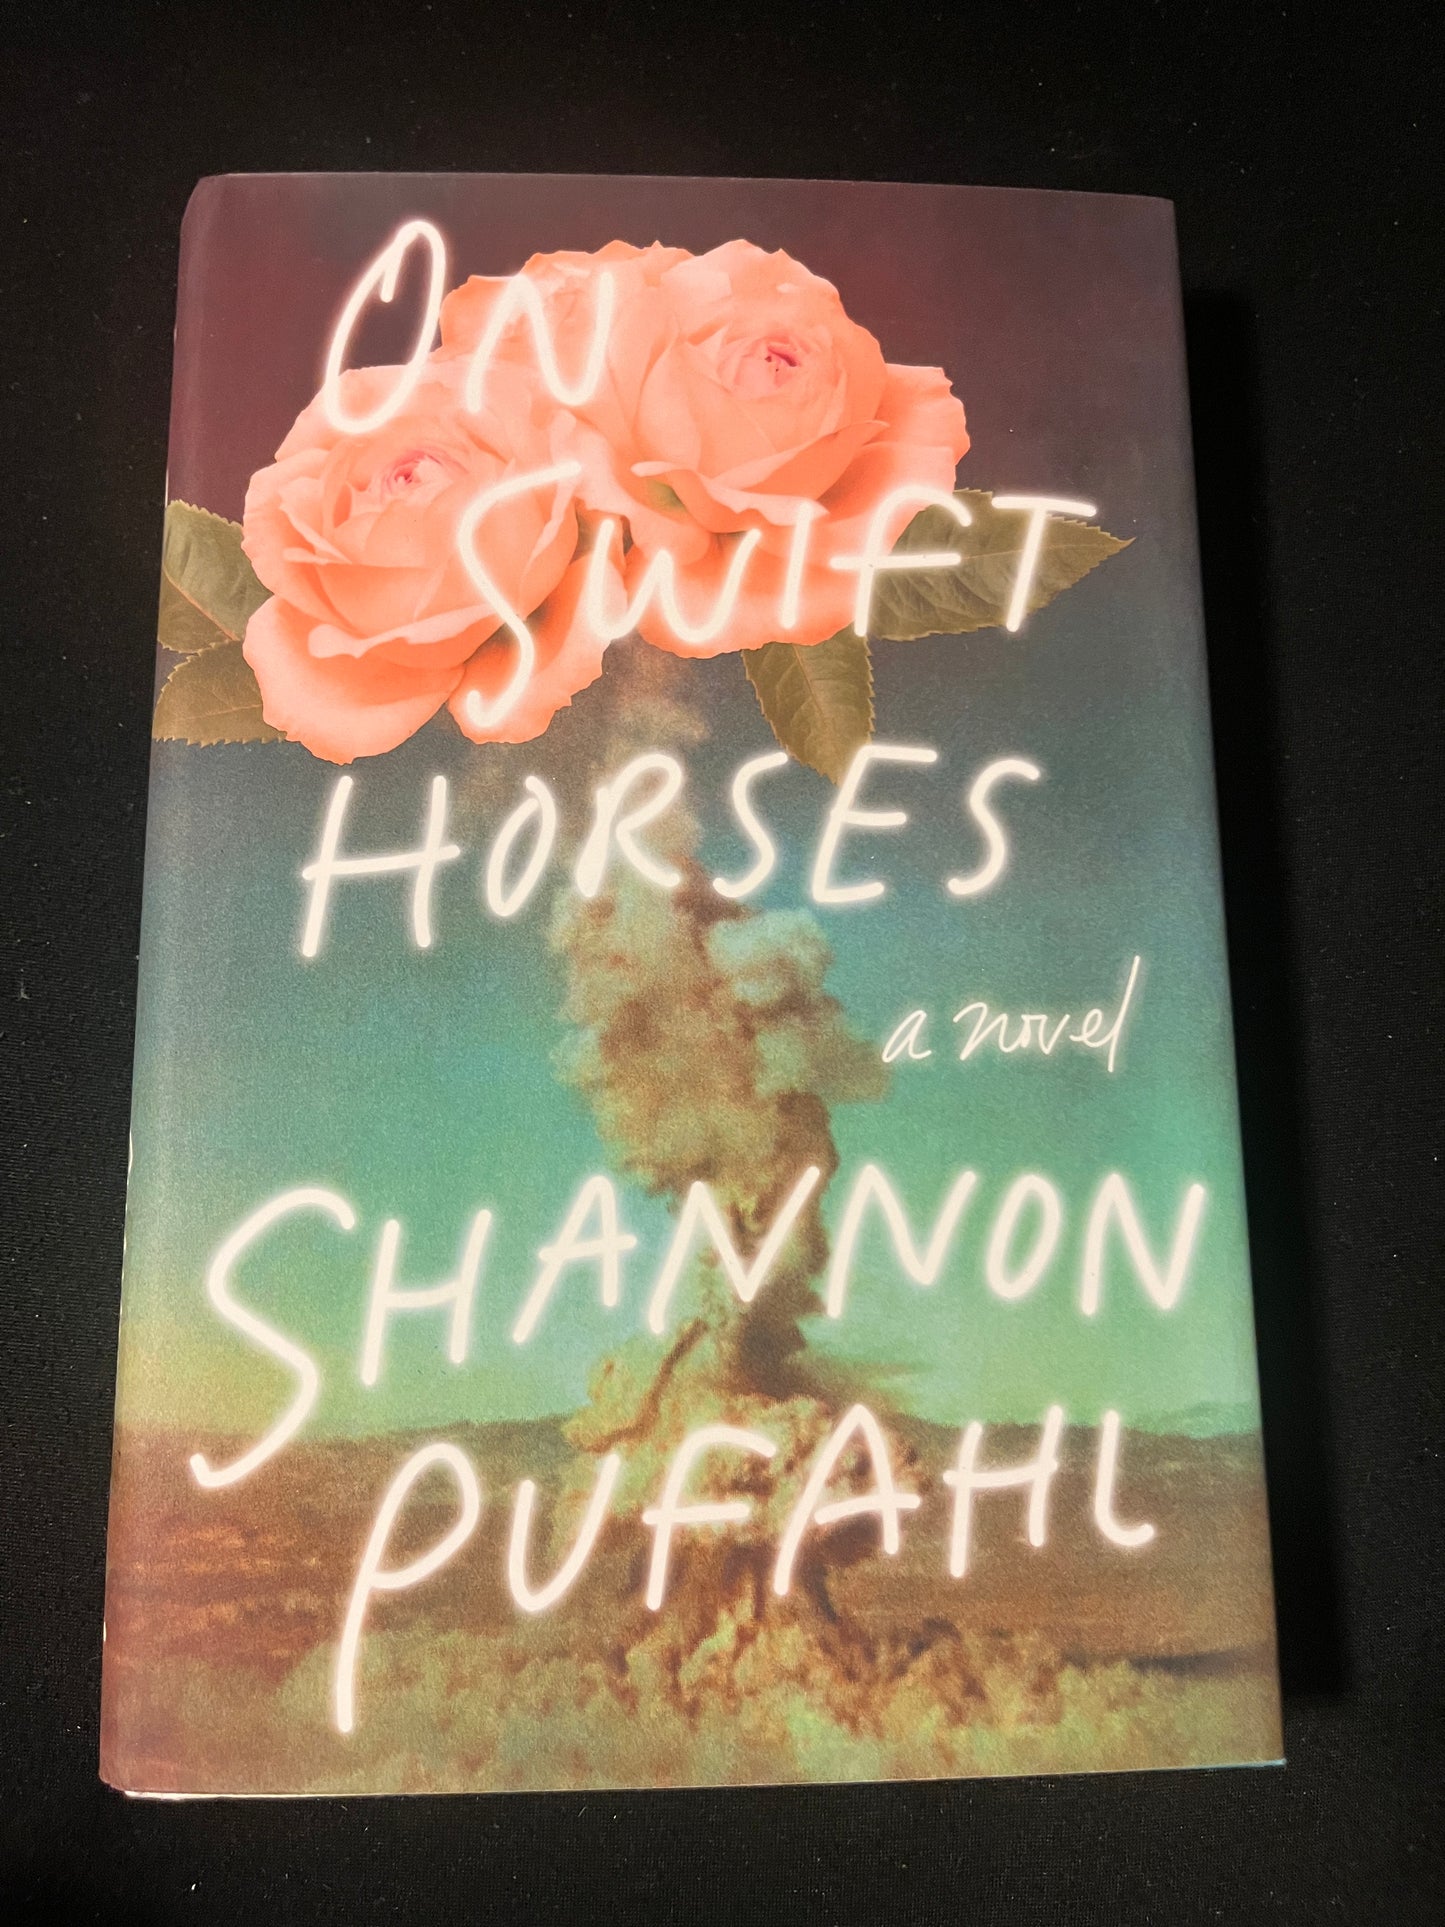 ON SWIFT HORSES by Shannon Pufahl